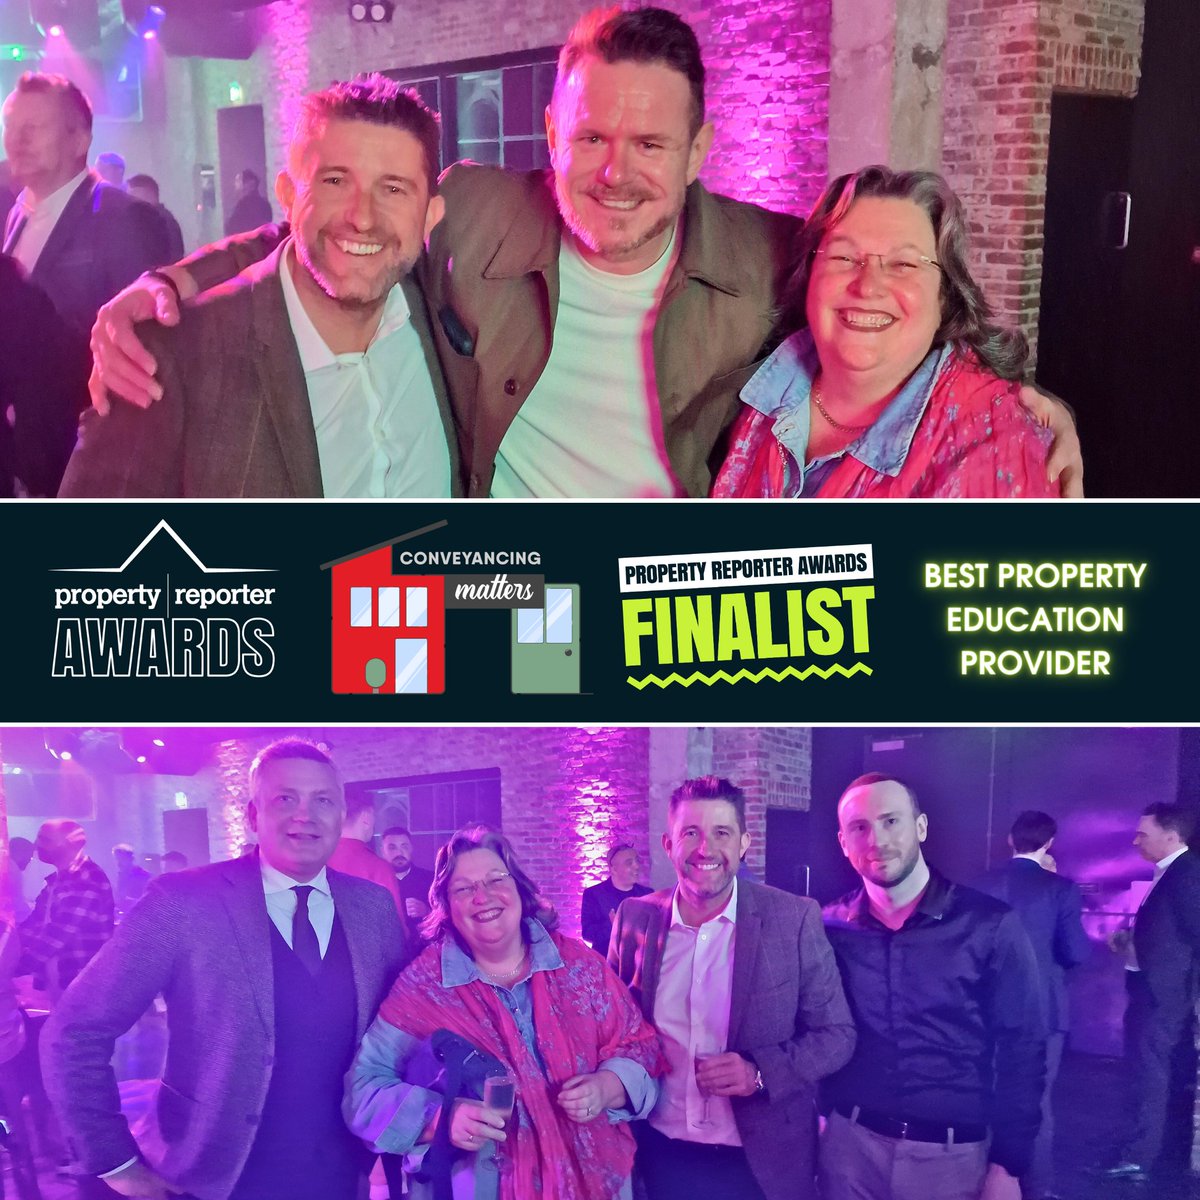 We're a Property Reporter Awards Finalist, so join our acclaimed subscription service for the latest news and monthly webinars - conveyancing-matters.co.uk/subscribe🎓🏡

It was great catching up with fellow property expert @russellquirk at the #PRA24 ceremony! 🏆

@AdaptLaw @stuartforsdike